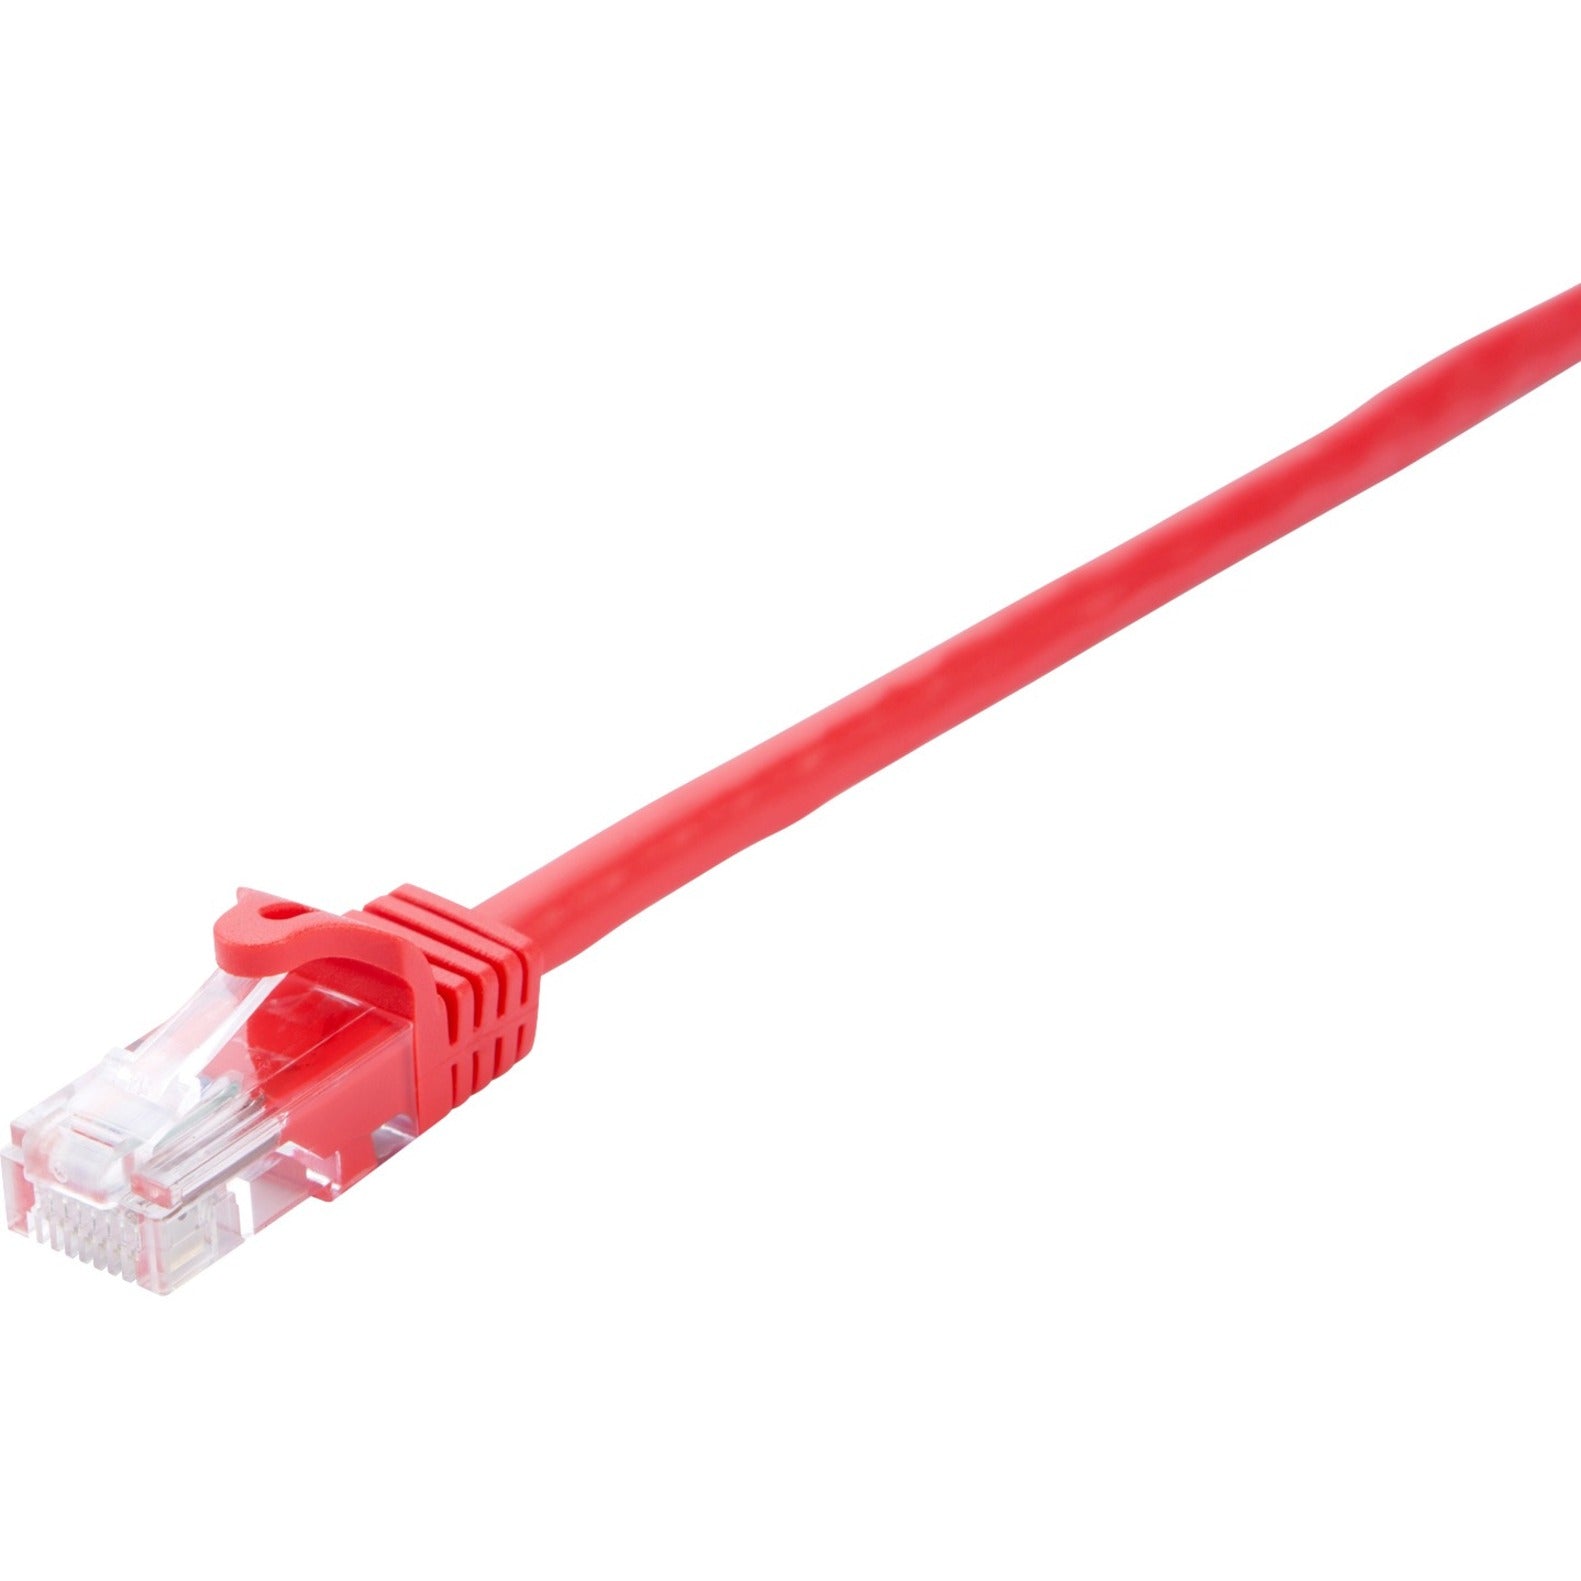 V7 V7CAT5UTP-10M-RED-1N Red Cat5e Unshielded (UTP) Cable RJ45 Male to RJ45 Male 10m 32.8ft, Molded, Snagless, Noise Reducing, Strain Relief, Gold Plated